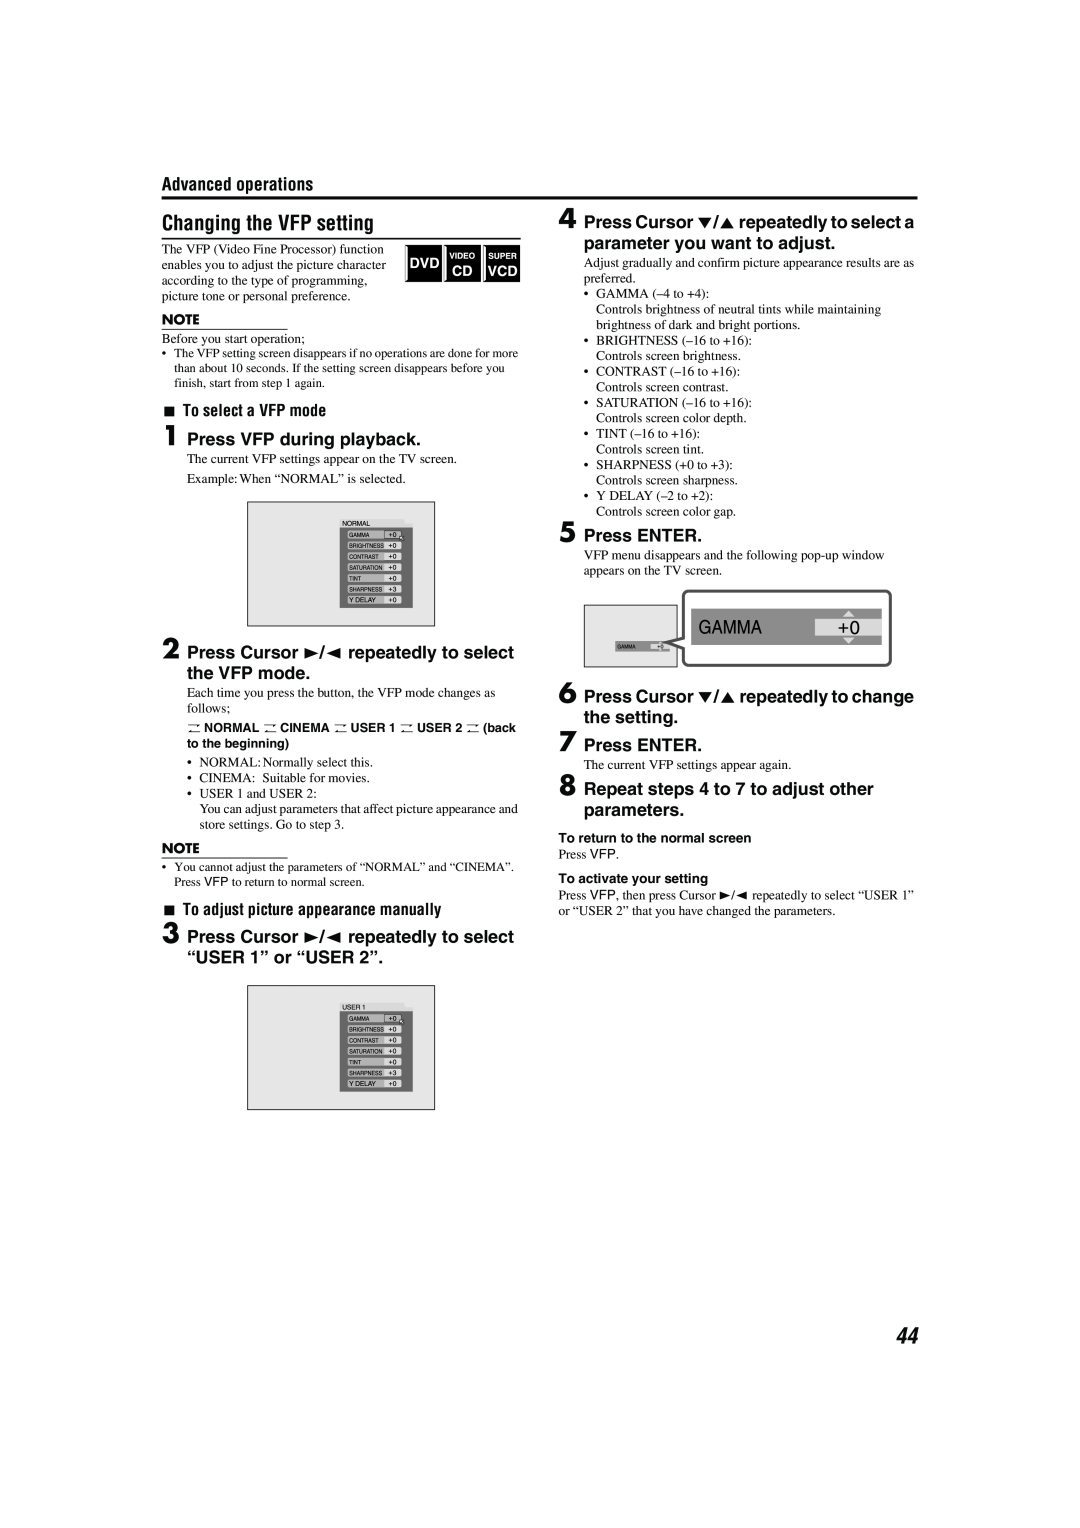 JVC M45 manual Changing the VFP setting, Press Cursor //5repeatedly to select a, parameter you want to adjust, Press ENTER 